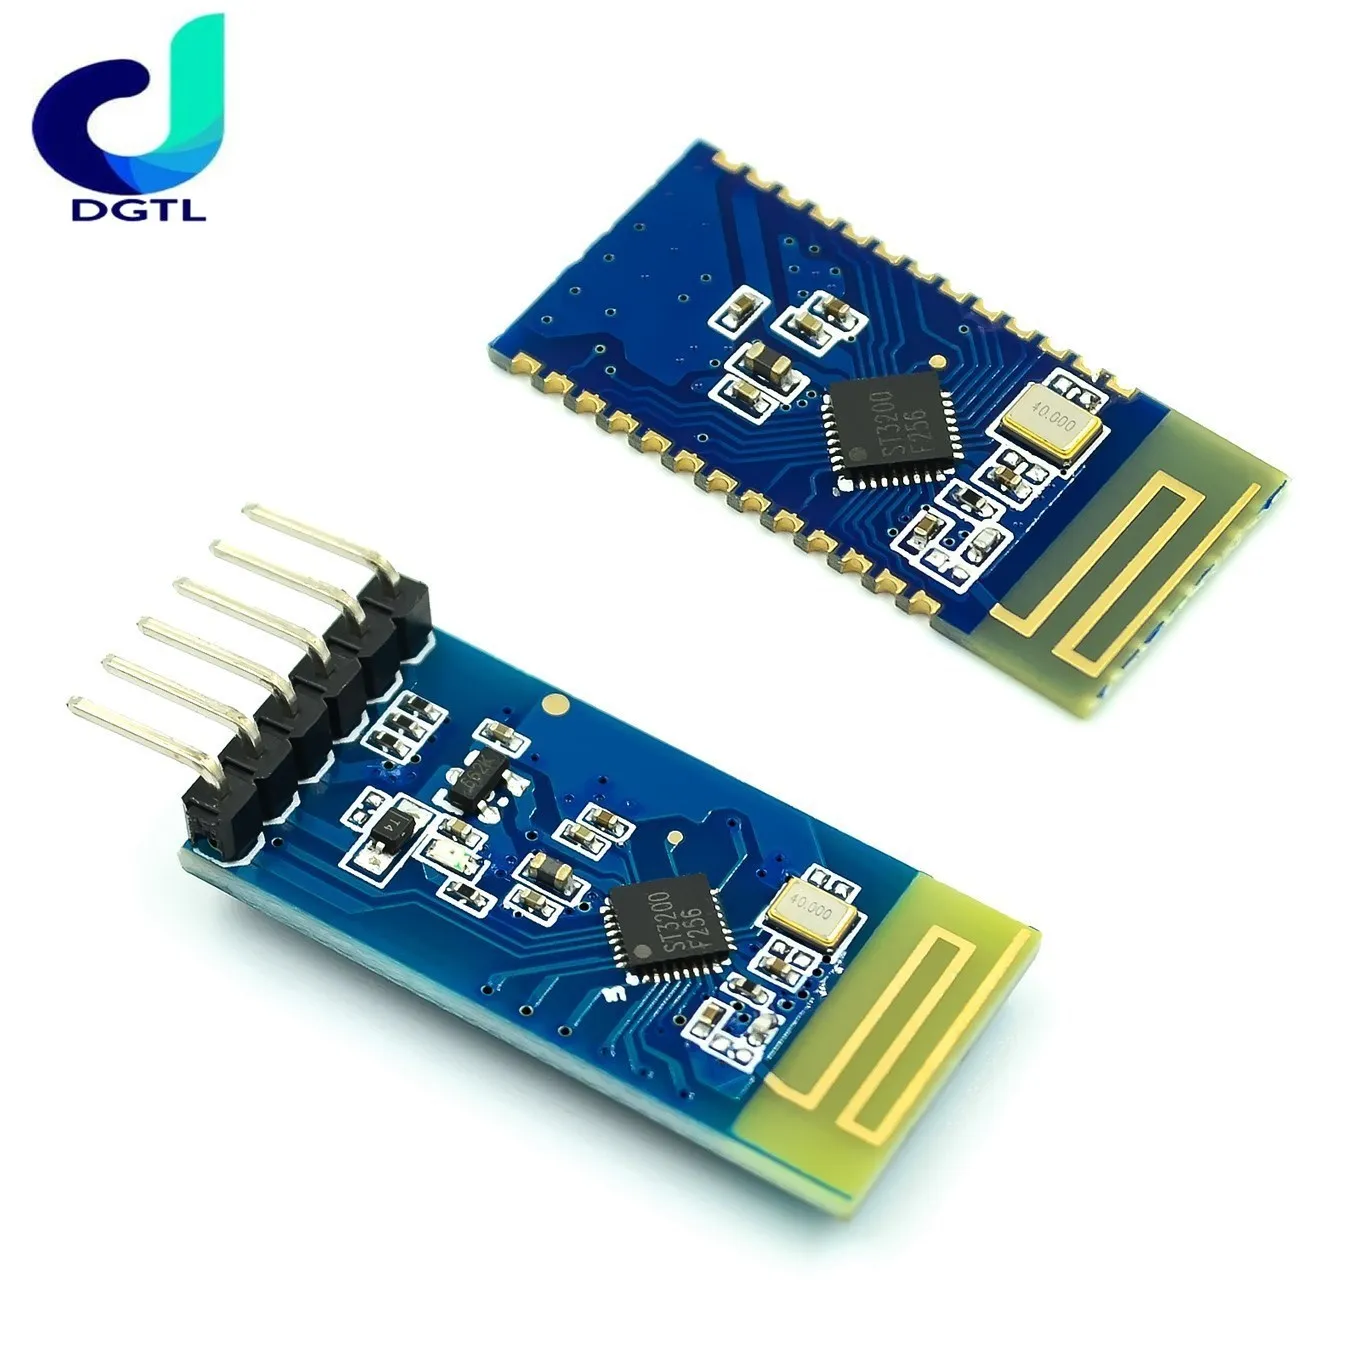 

10pcs JDY-33 Dual mode For Bluetooth serial Port SPP SPP-C compatible with HC-05/06 /JDY-31/30 slave 3.0